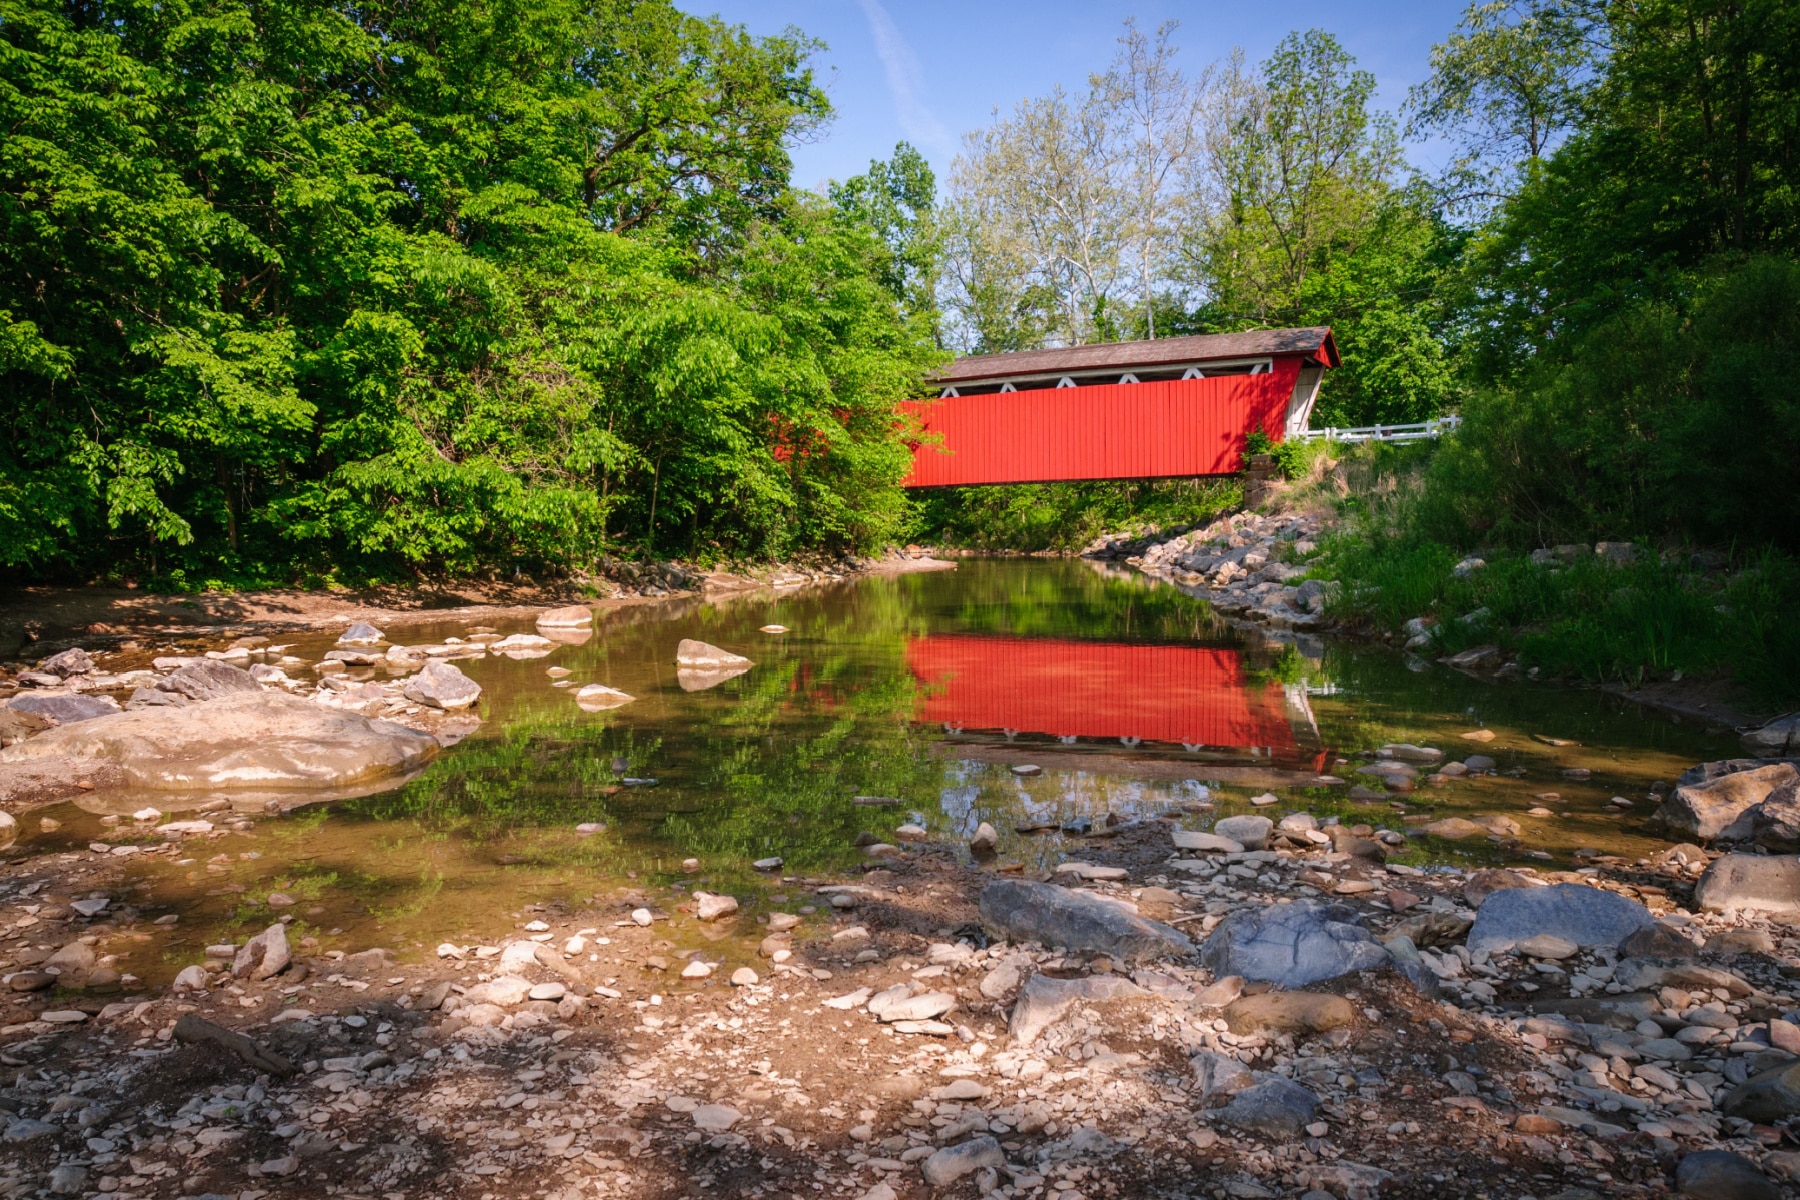 A red covered bridge over a river filled with rocks and trees on each side in Cuyahoga Valley National Park.